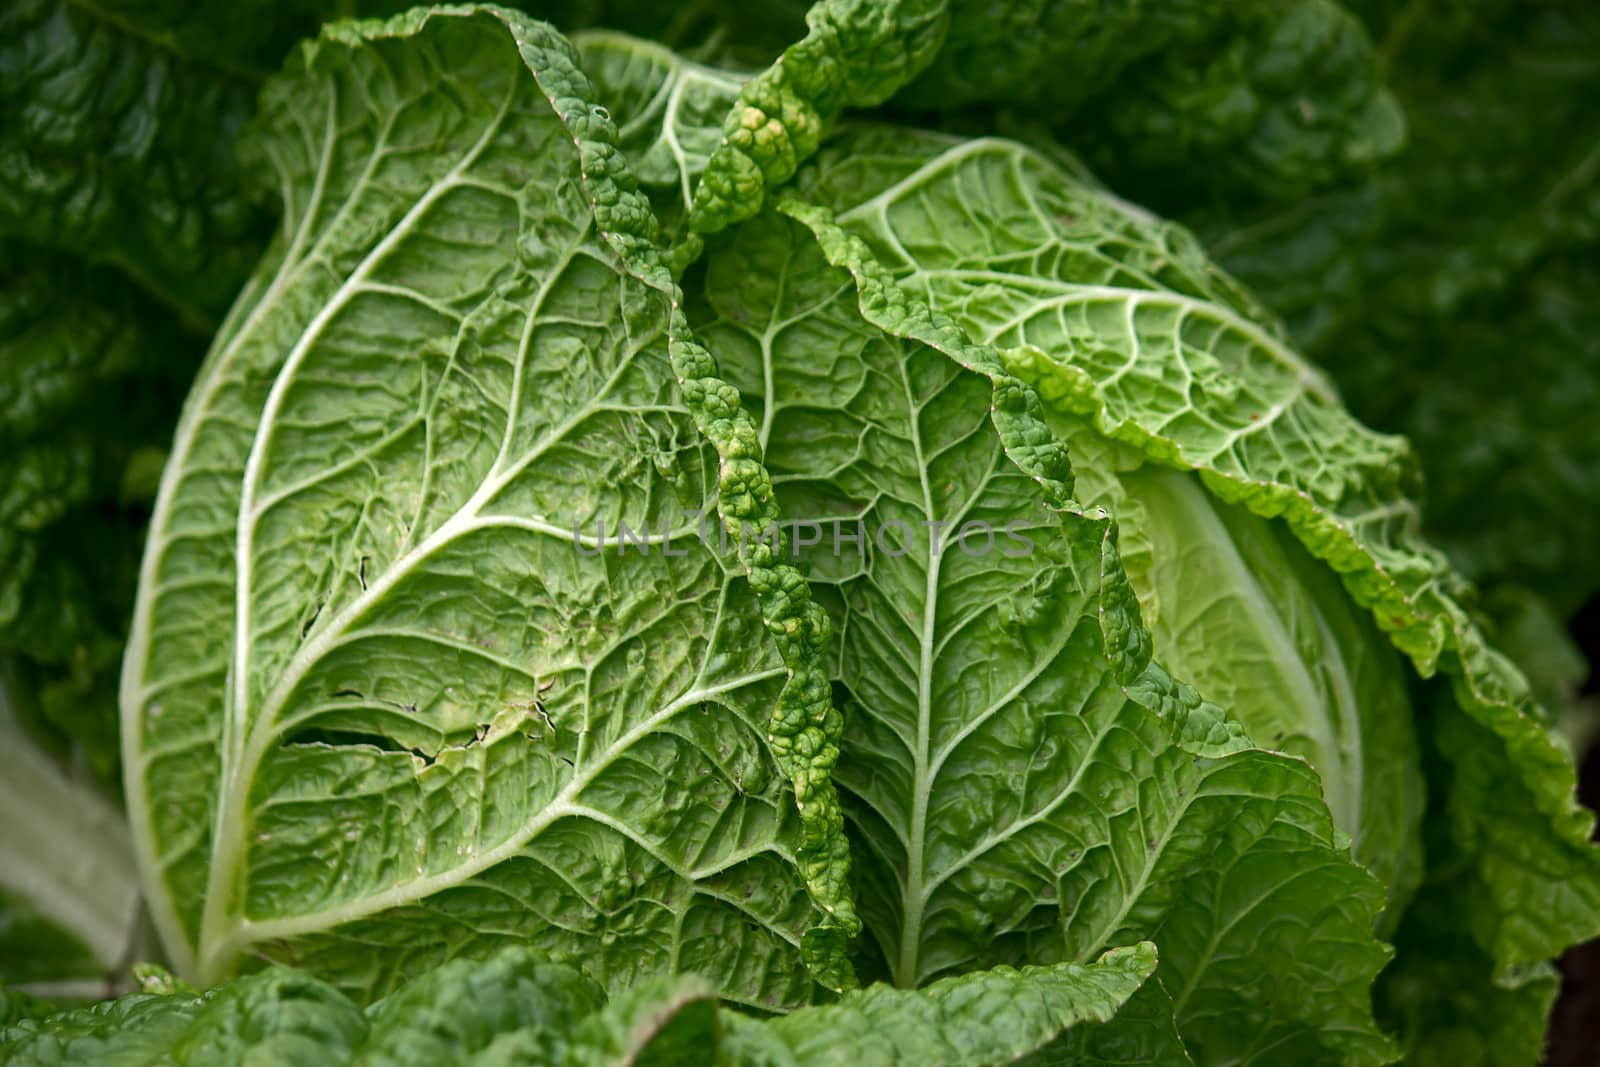 View of  green leaves of savoy cabbage close up.